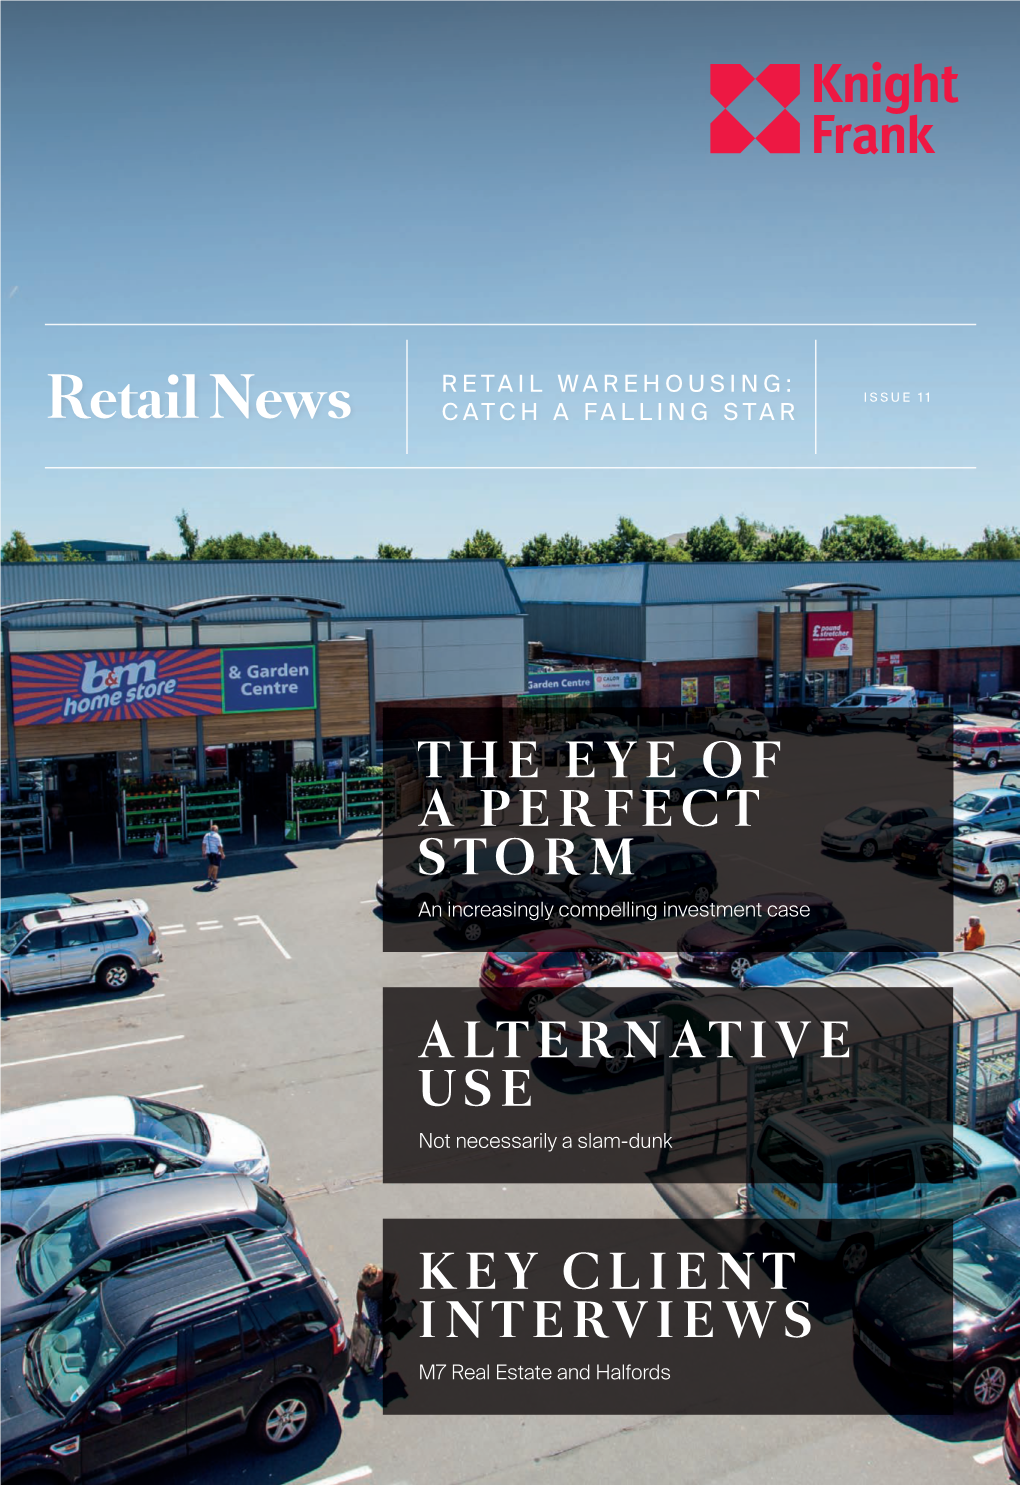 RETAIL WAREHOUSING: ISSUE 11 Retail News CATCH a FALLING STAR